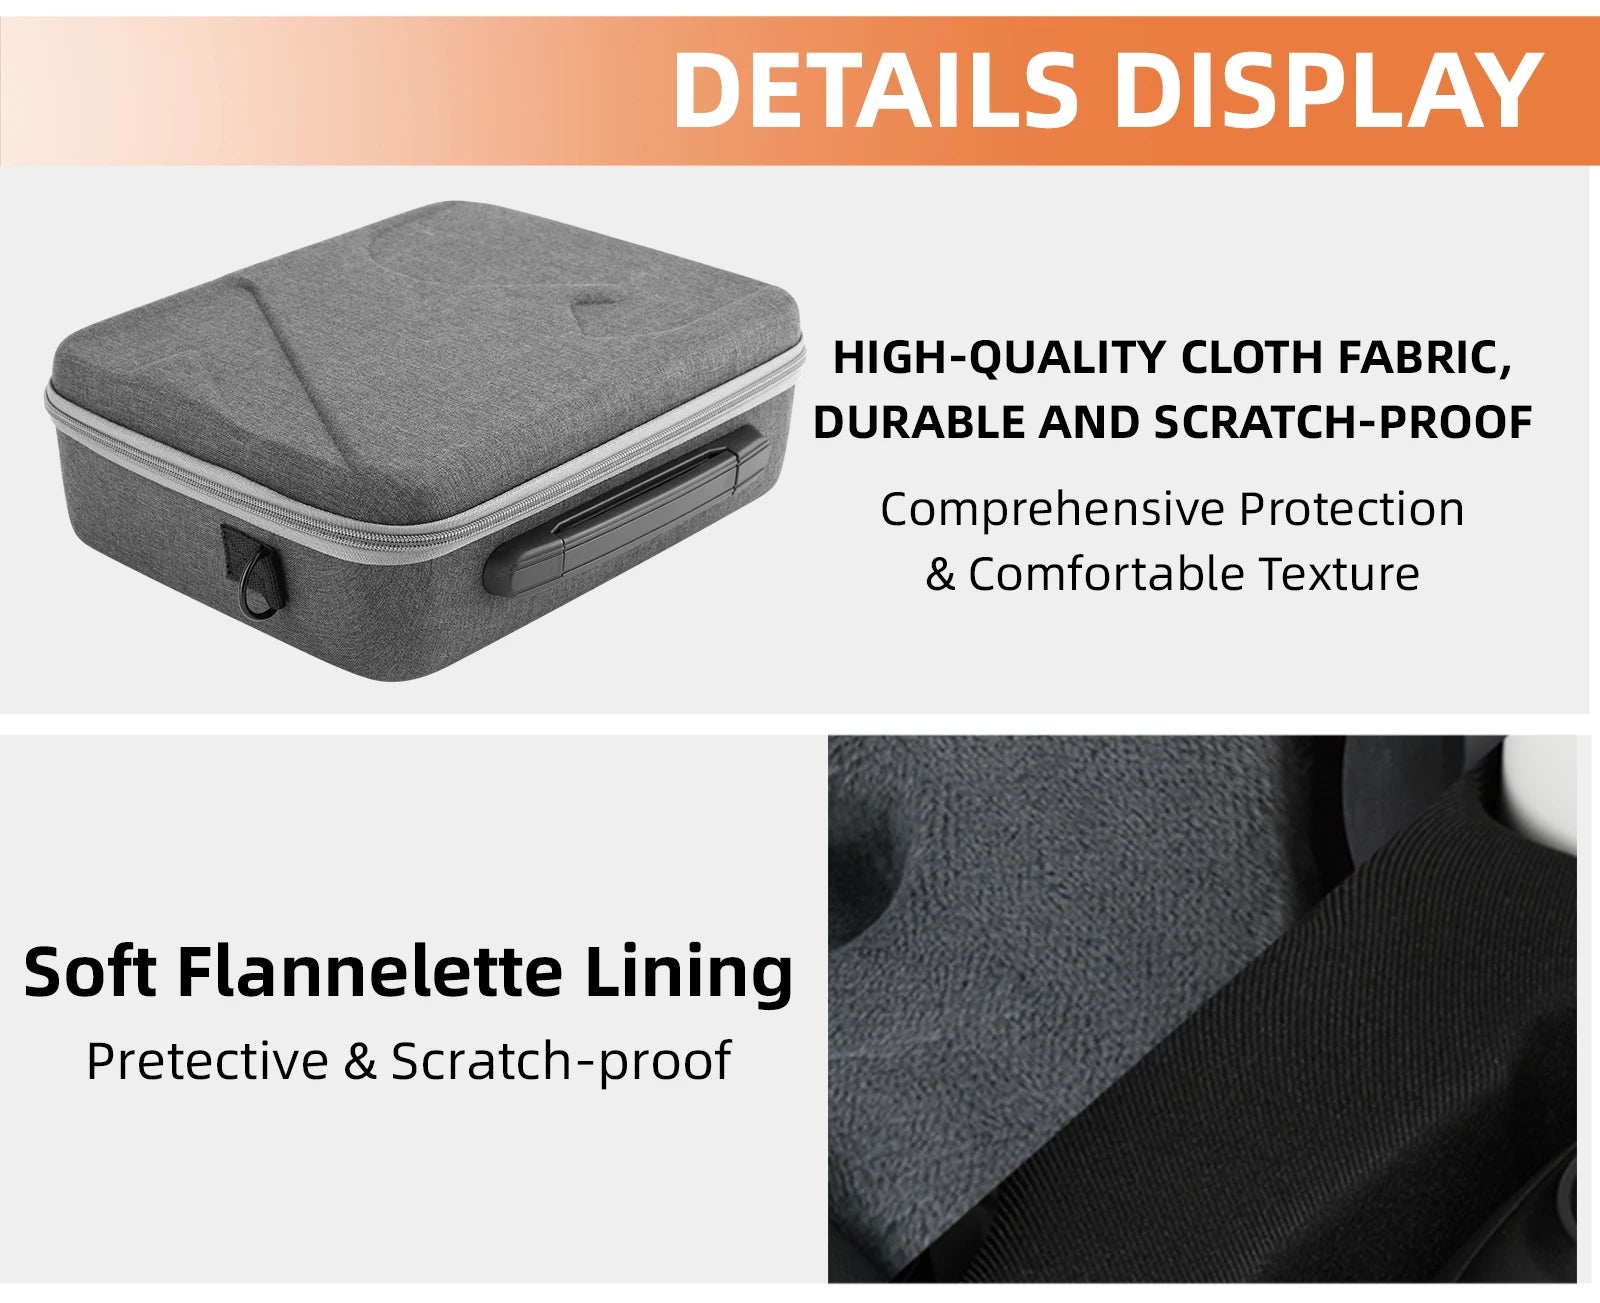 Portable Carrying Case For DJI Mini 4 Pro, DETAILS DISPLAY HIGH-QUALITY CLOTH FABRIC